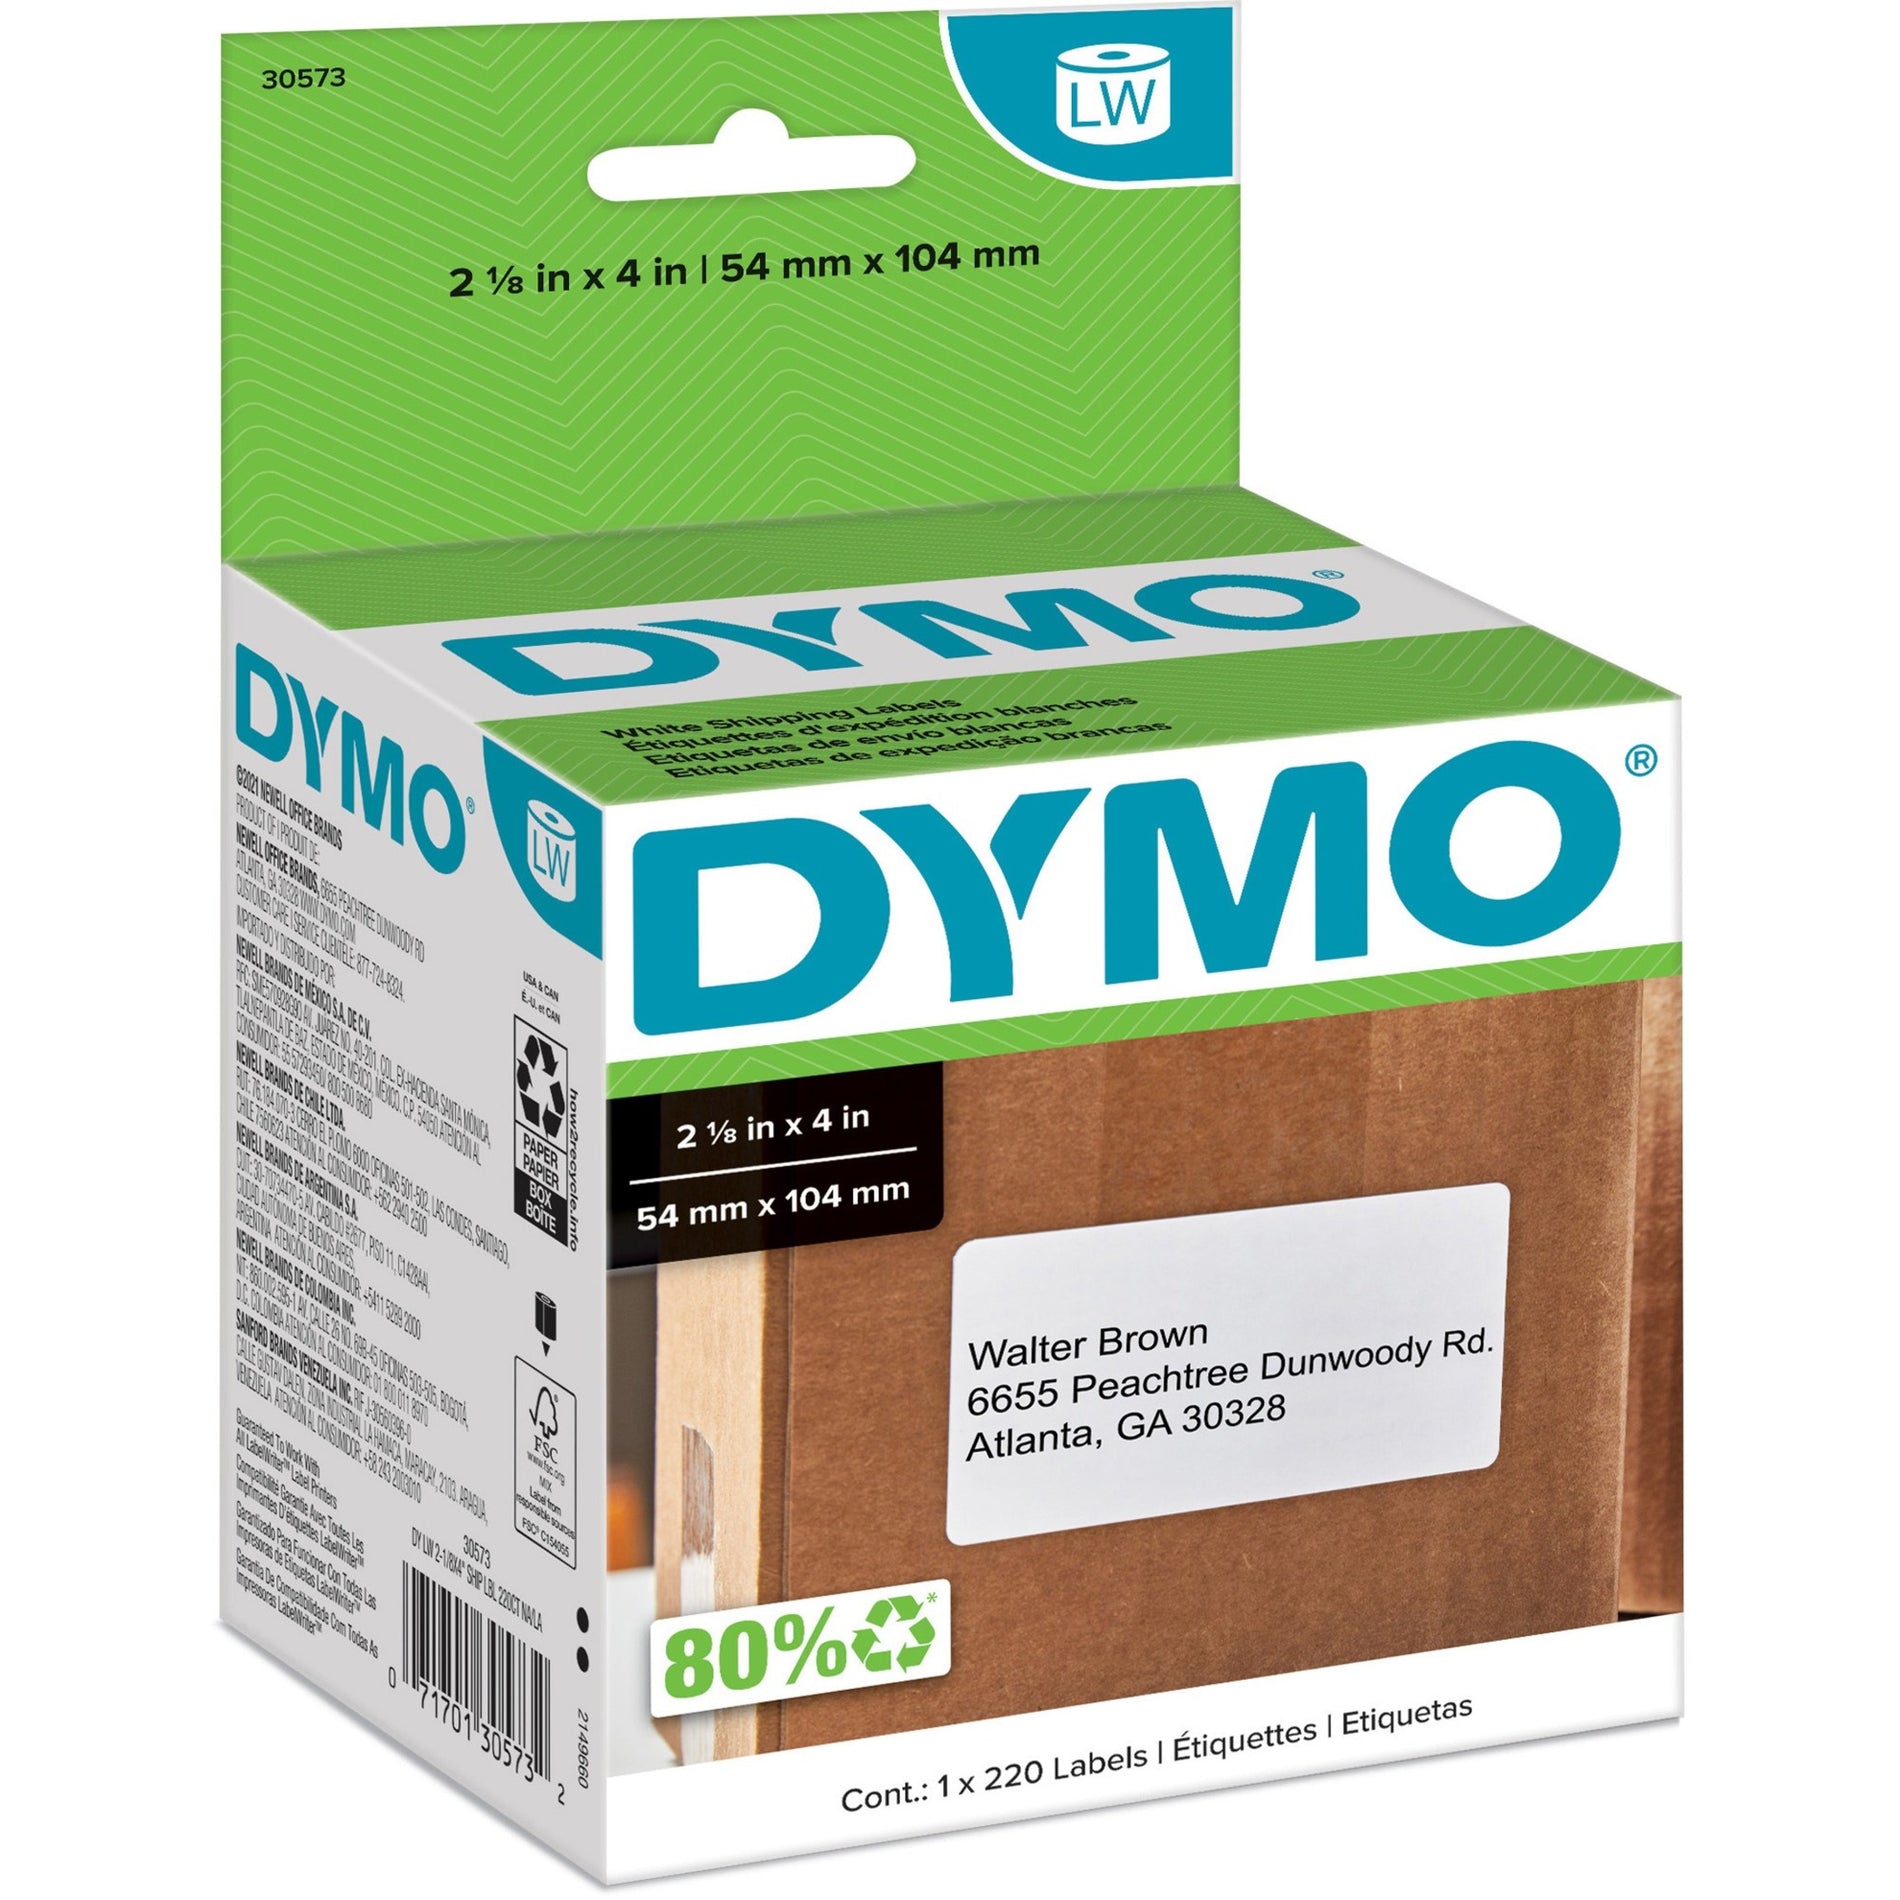 Dymo 30573 LW Shipping Labels, 2 1/8" x 4" Length, White, 220 / Pack